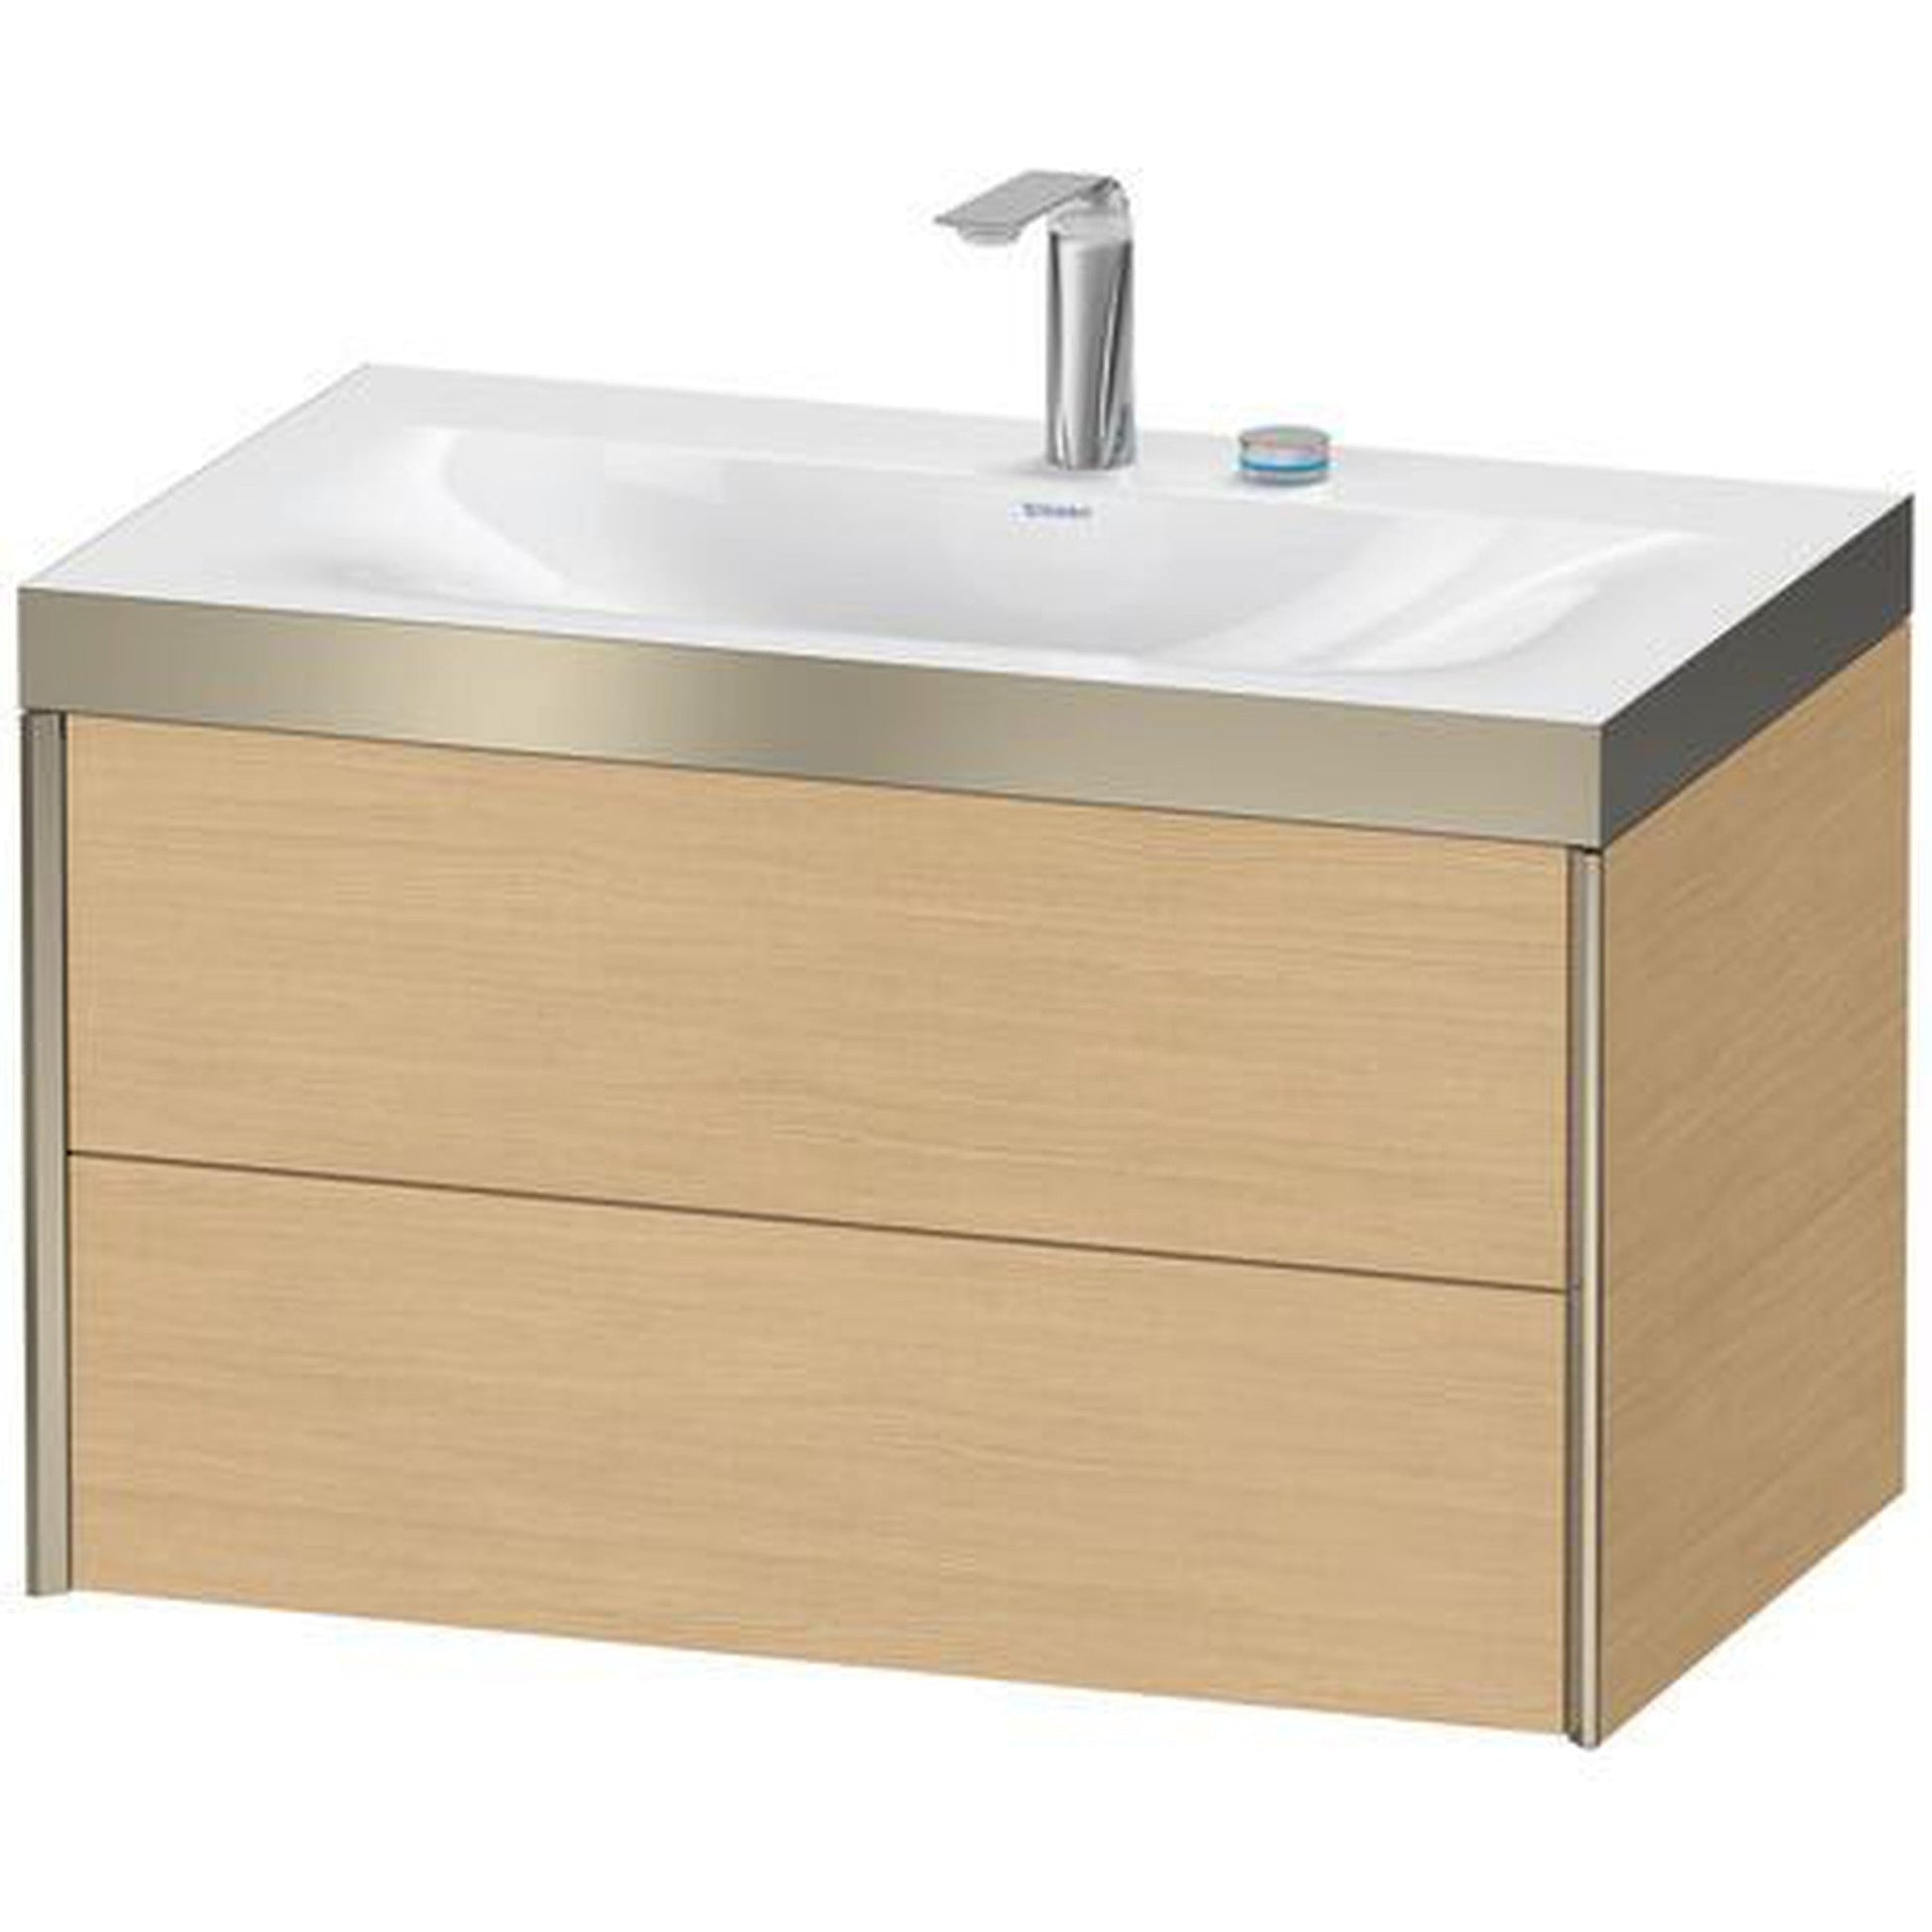 Duravit Xviu 31" x 20" x 19" Two Drawer C-Bonded Wall-Mount Vanity Kit With Two Tap Holes, Natural Oak (XV4615EB130P)